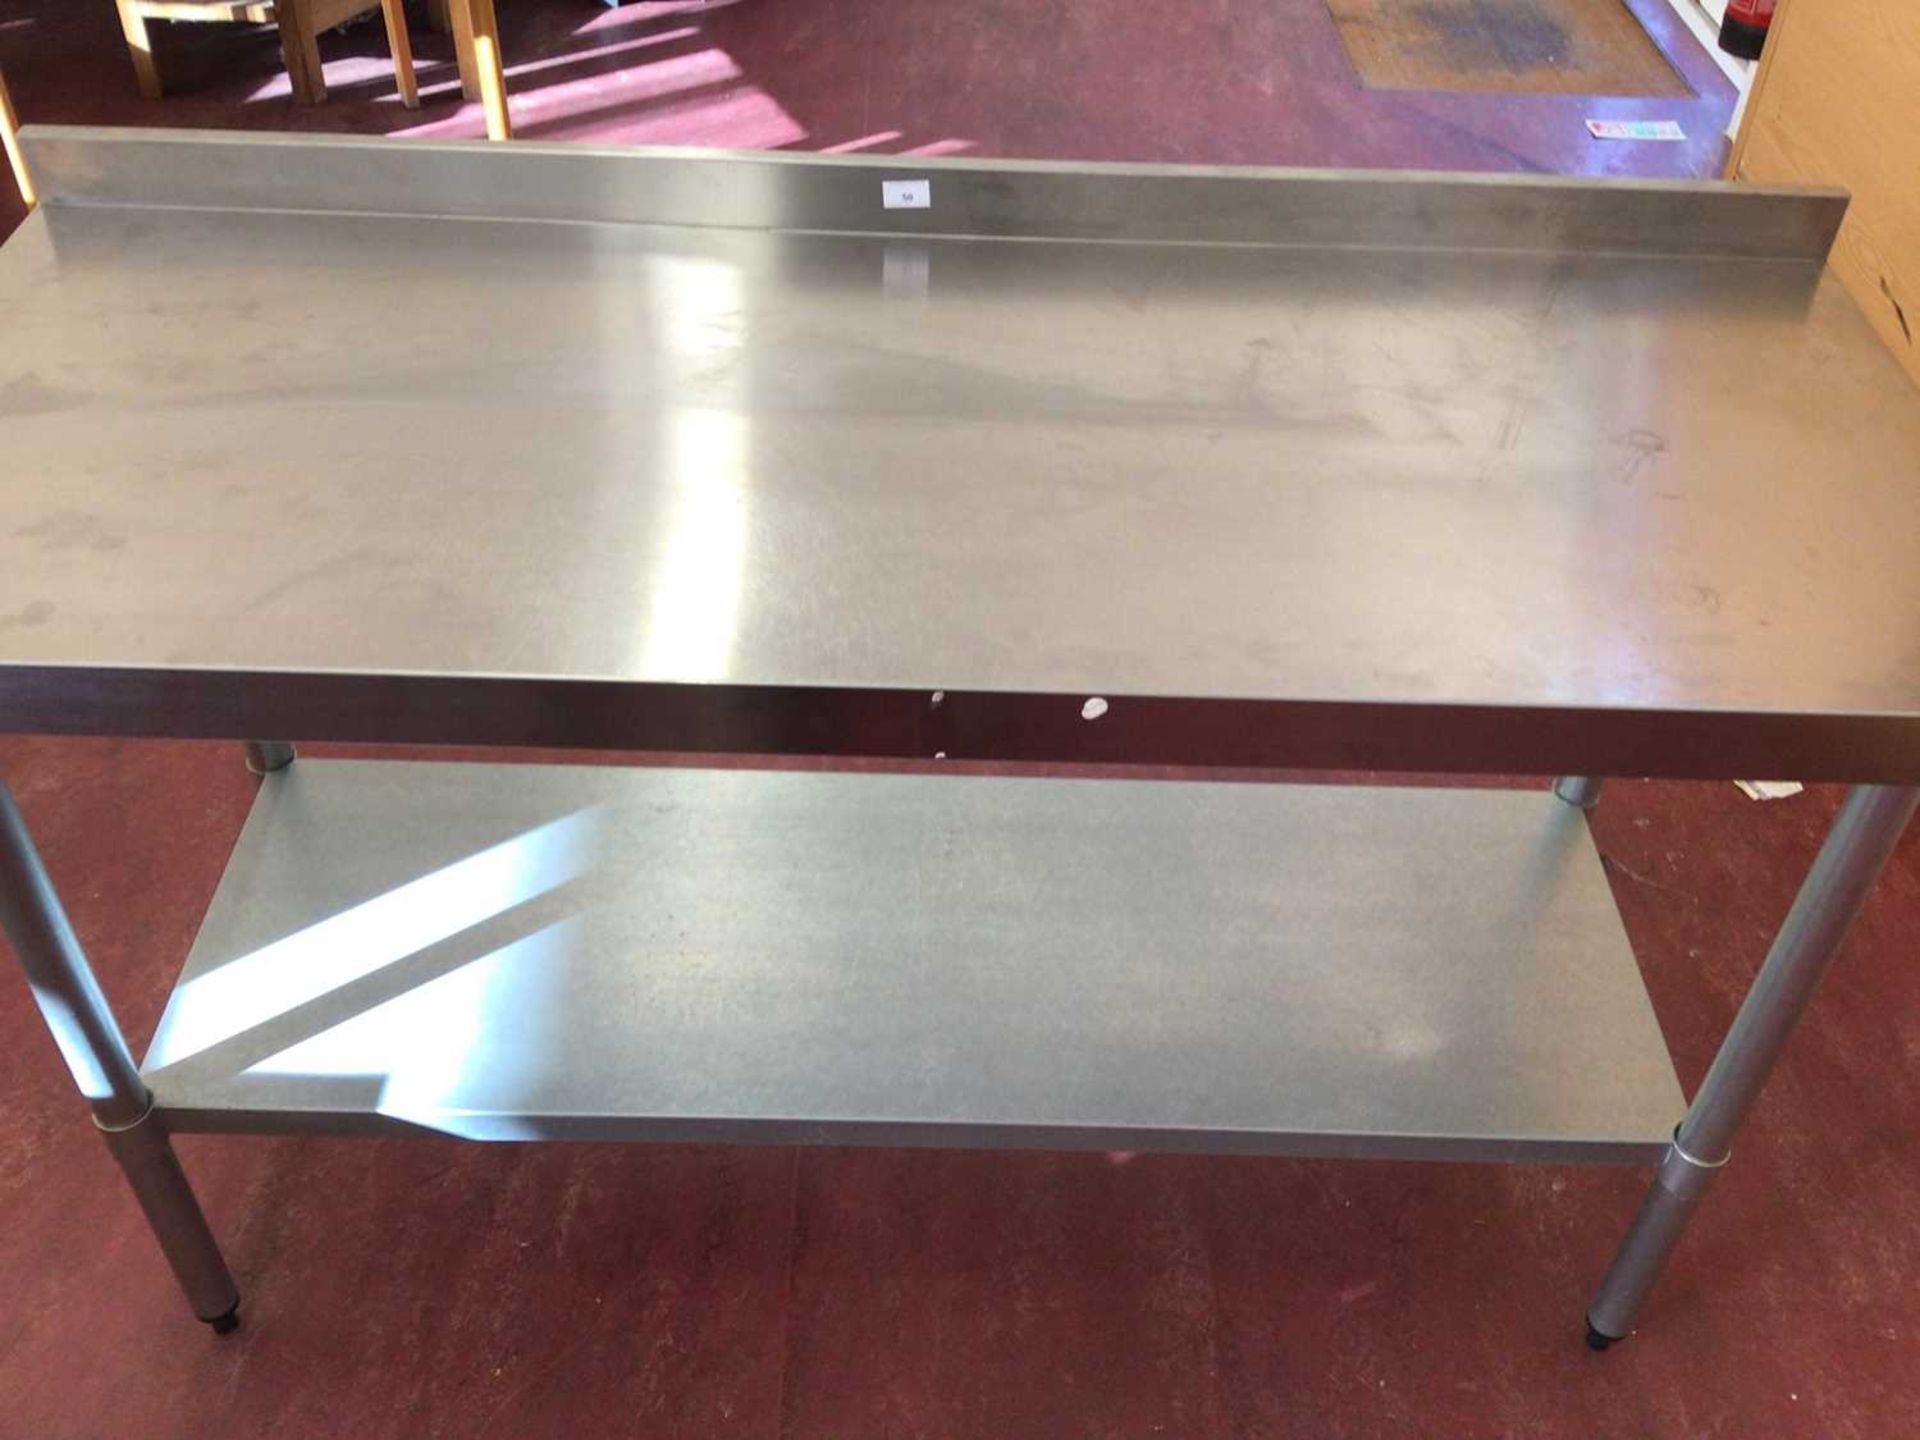 A wall standing stainless steel preparation bench, with shelf under, 1500 mm - Image 2 of 2